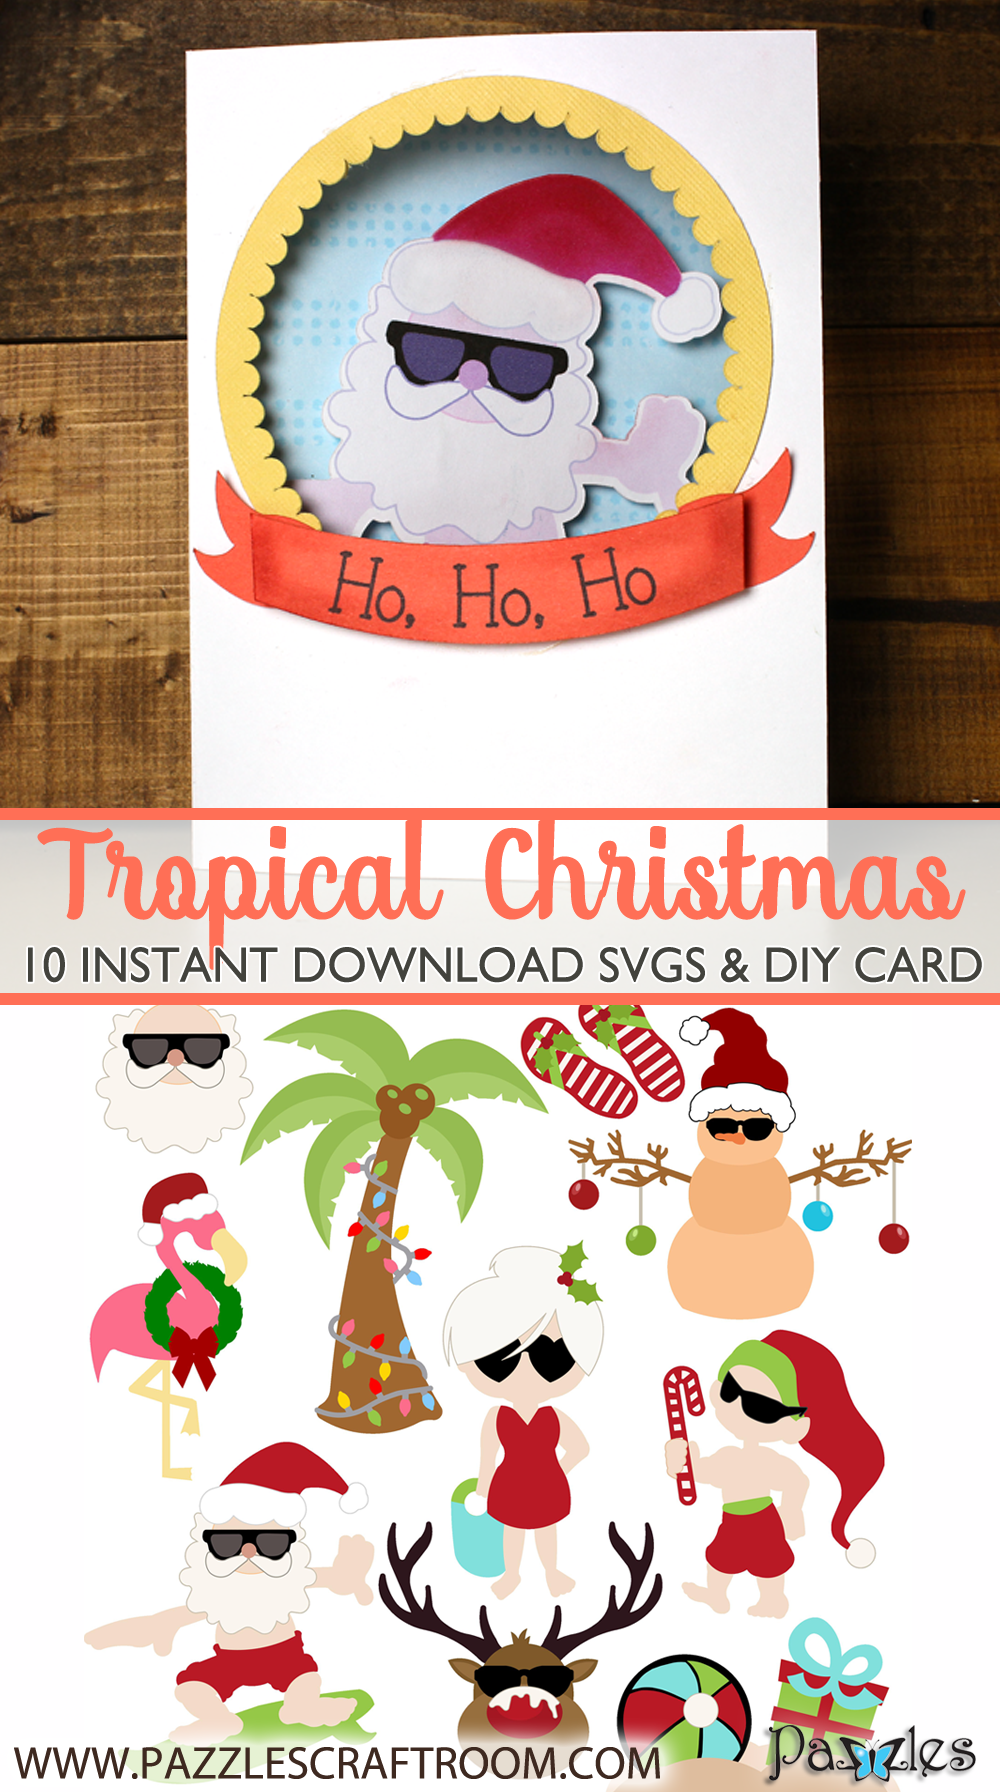 Pazzles DIY Tropical Christmas SVG Cutting Collection. Instant download in SVG, AI, and WPC compatible with all major electronic cutters including Pazzles Inspiration, Cricut, and Silhouette Cameo.